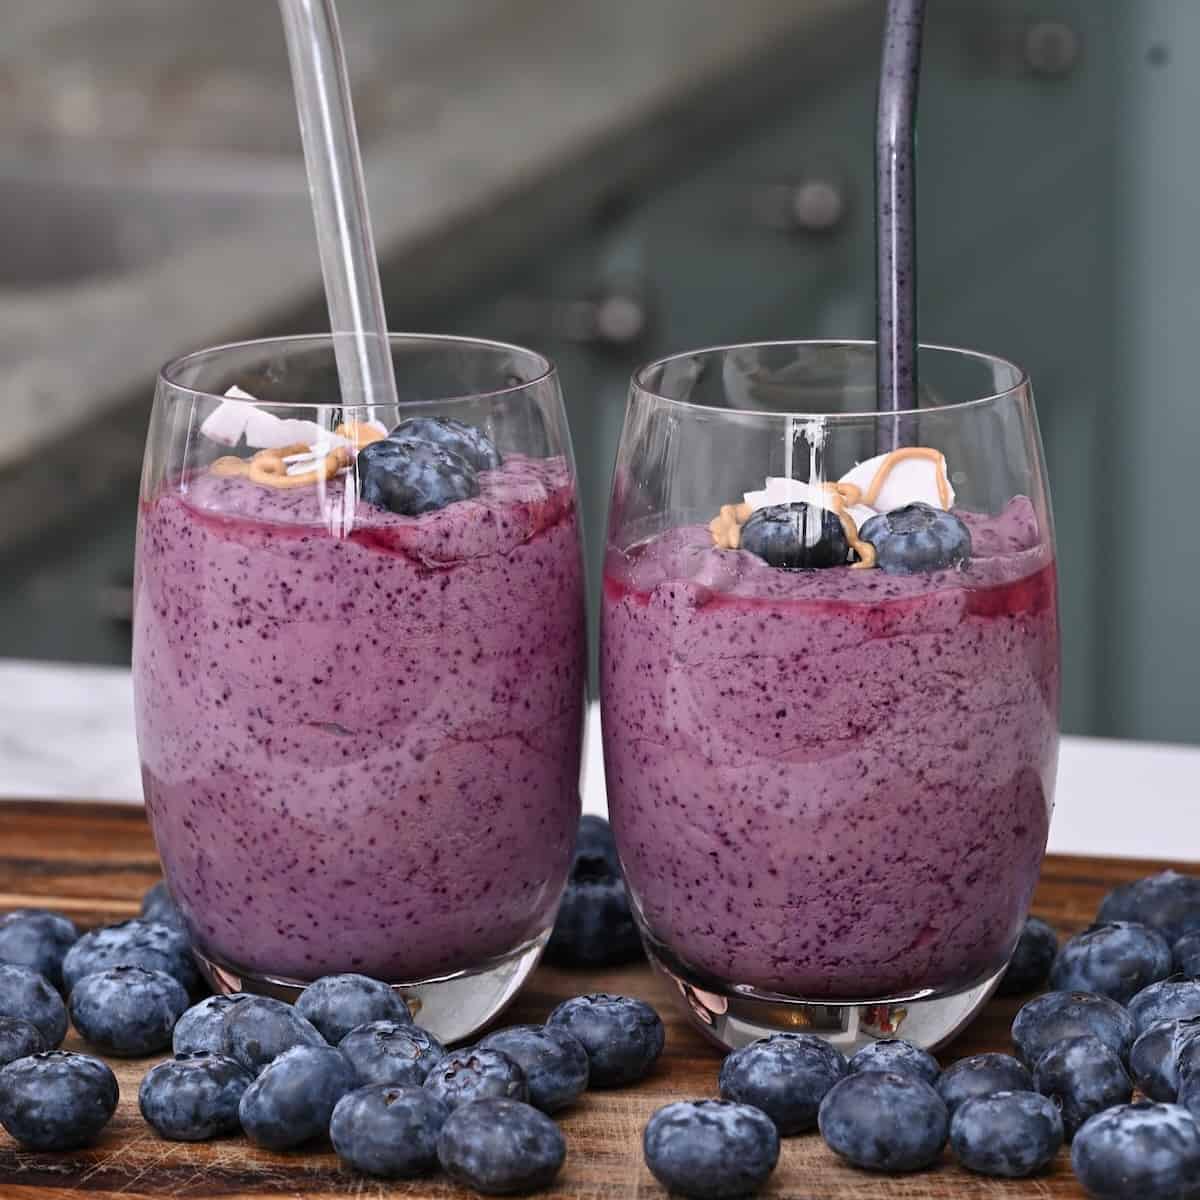 https://www.alphafoodie.com/wp-content/uploads/2022/03/Blueberry-Smoothie-Square.jpeg